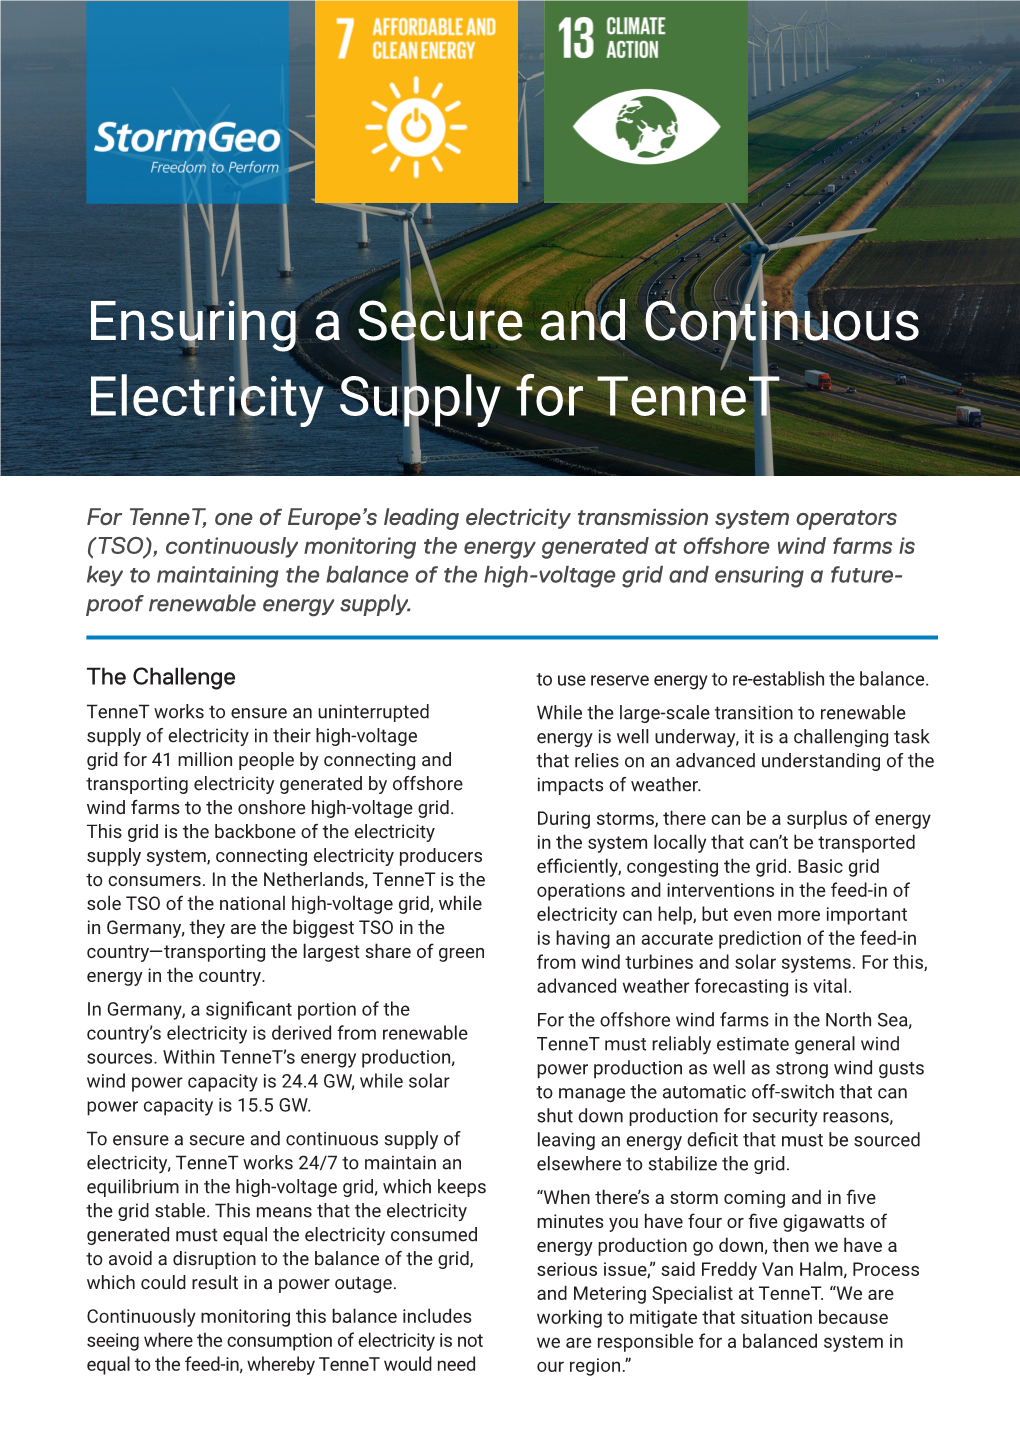 Ensuring a Secure and Continuous Electricity Supply for Tennet